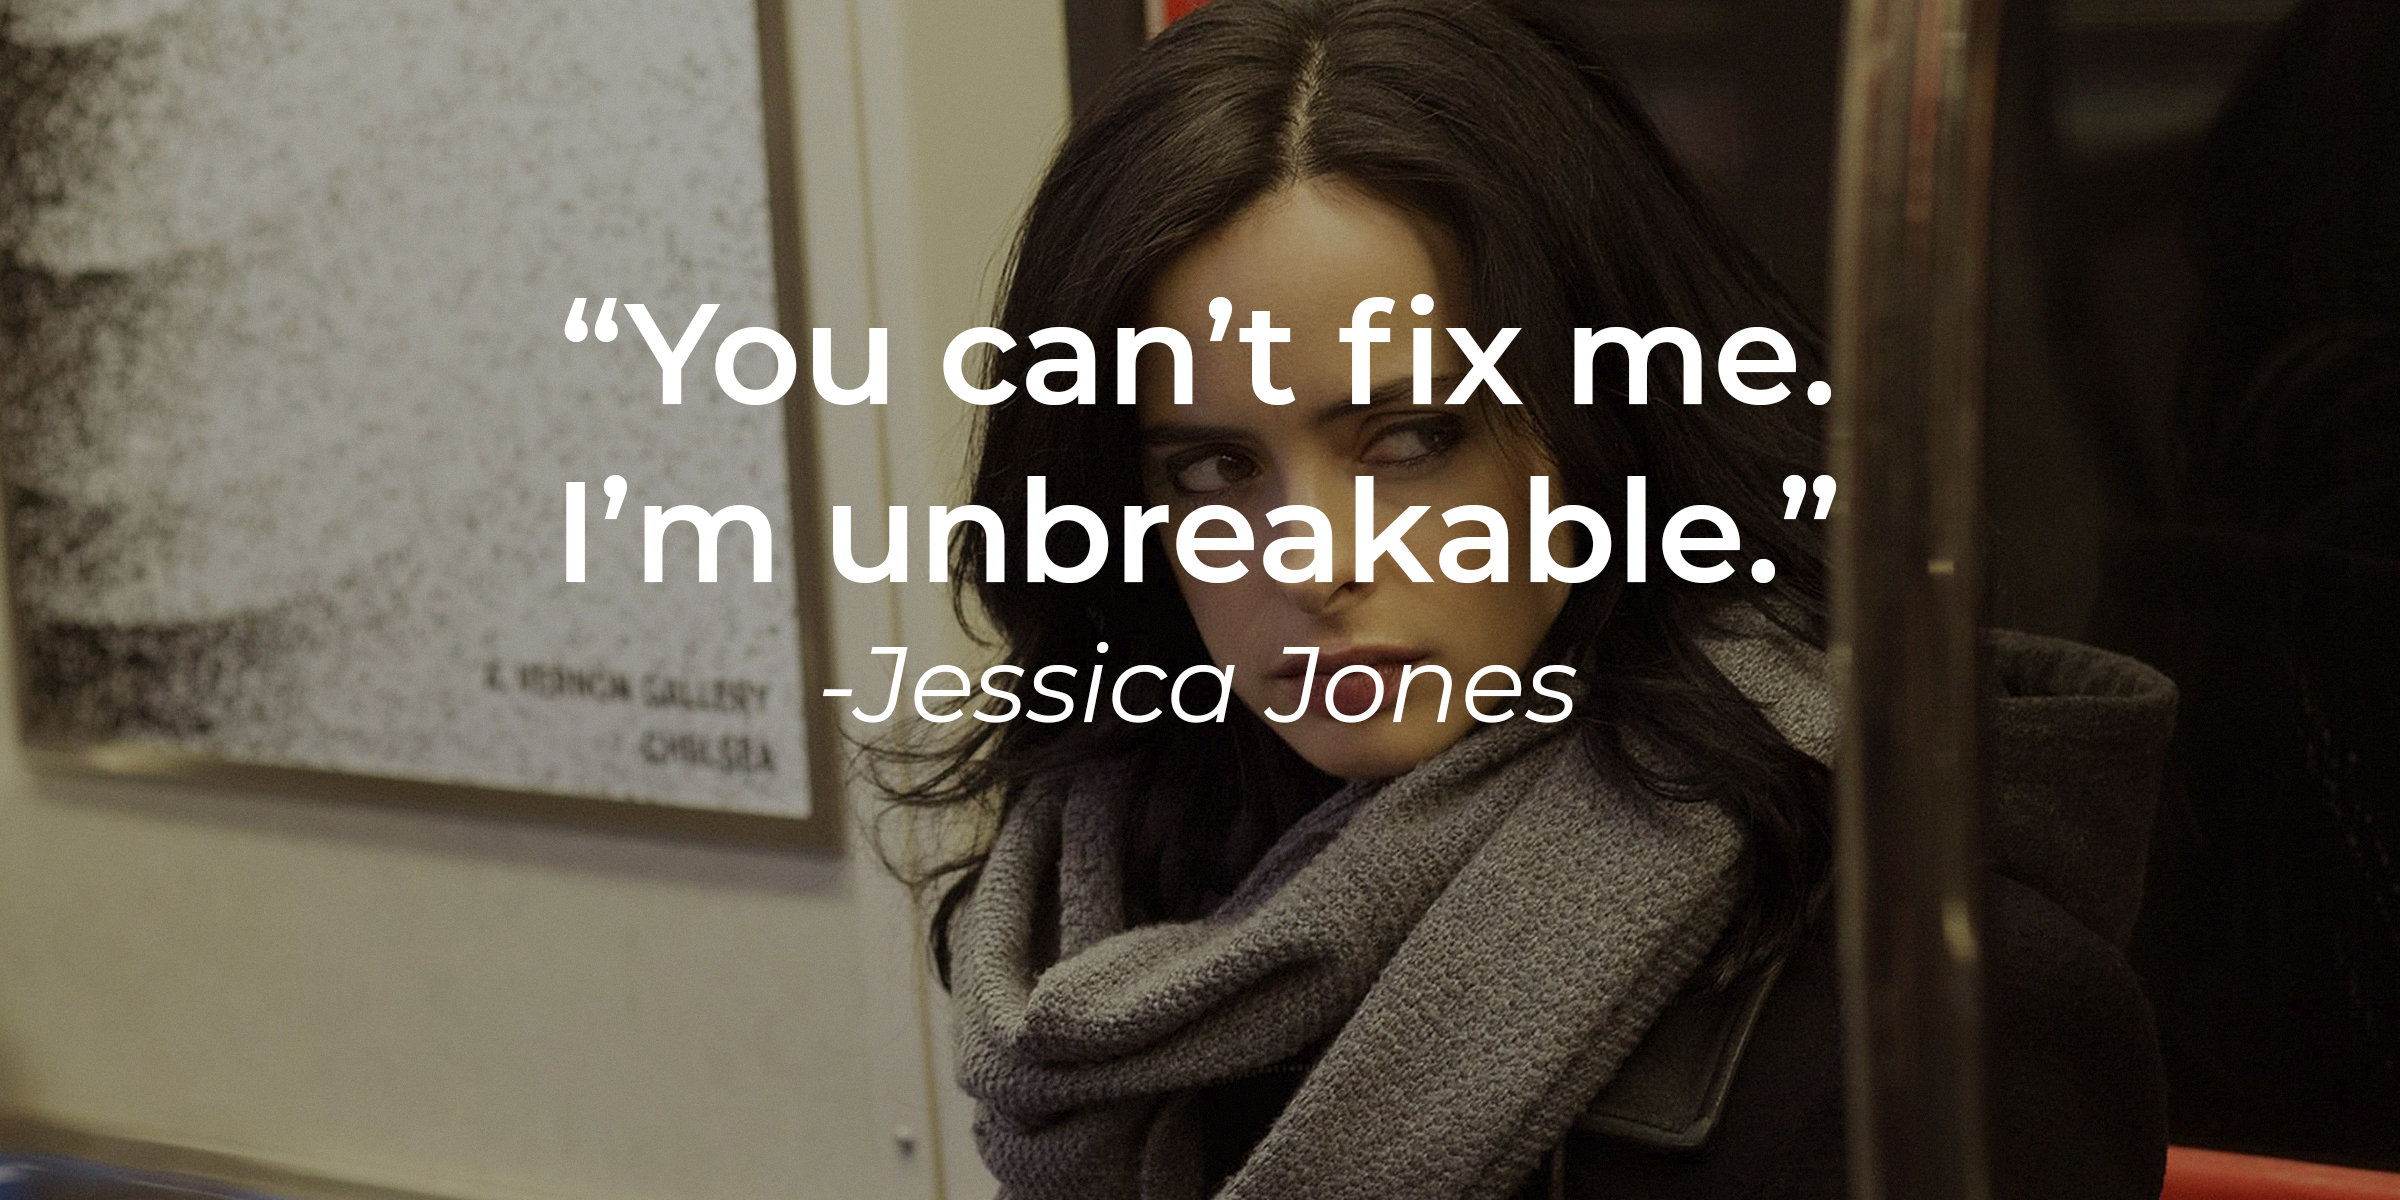 An image of Jessica Jones with her quote: “You can’t fix me. I’m unbreakable.” ┃Source: facebook.com/JessicaJonesLat